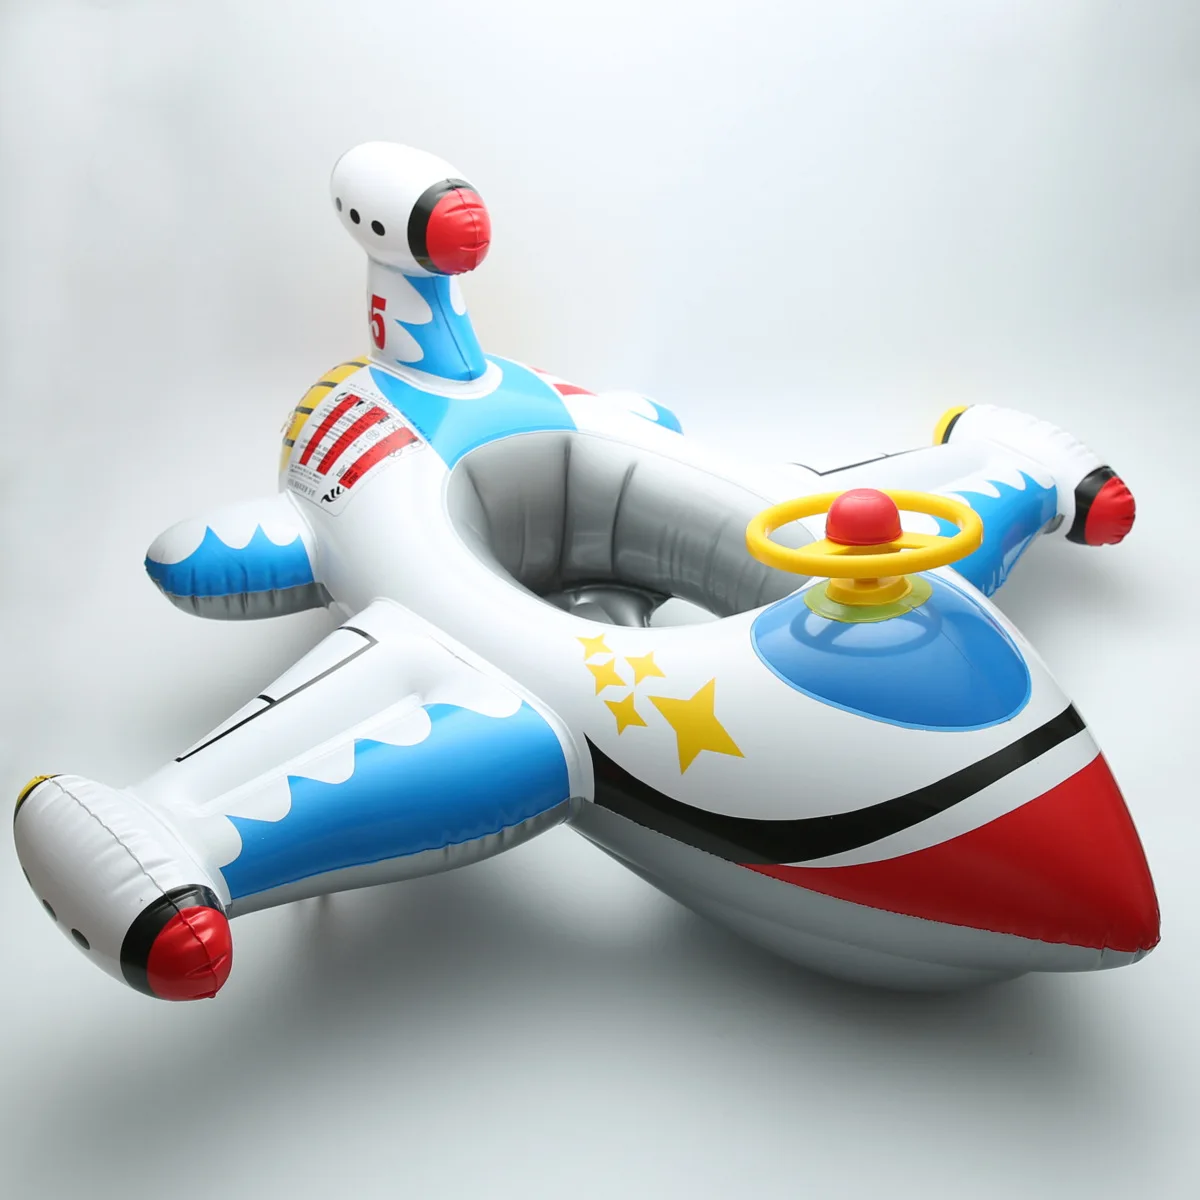 Plane Inflatable Aircraft Swimming Ring Seat Floating Children Kids Safety Beach Toy Babyfloat Summer Pool Inflatable SeatSafety